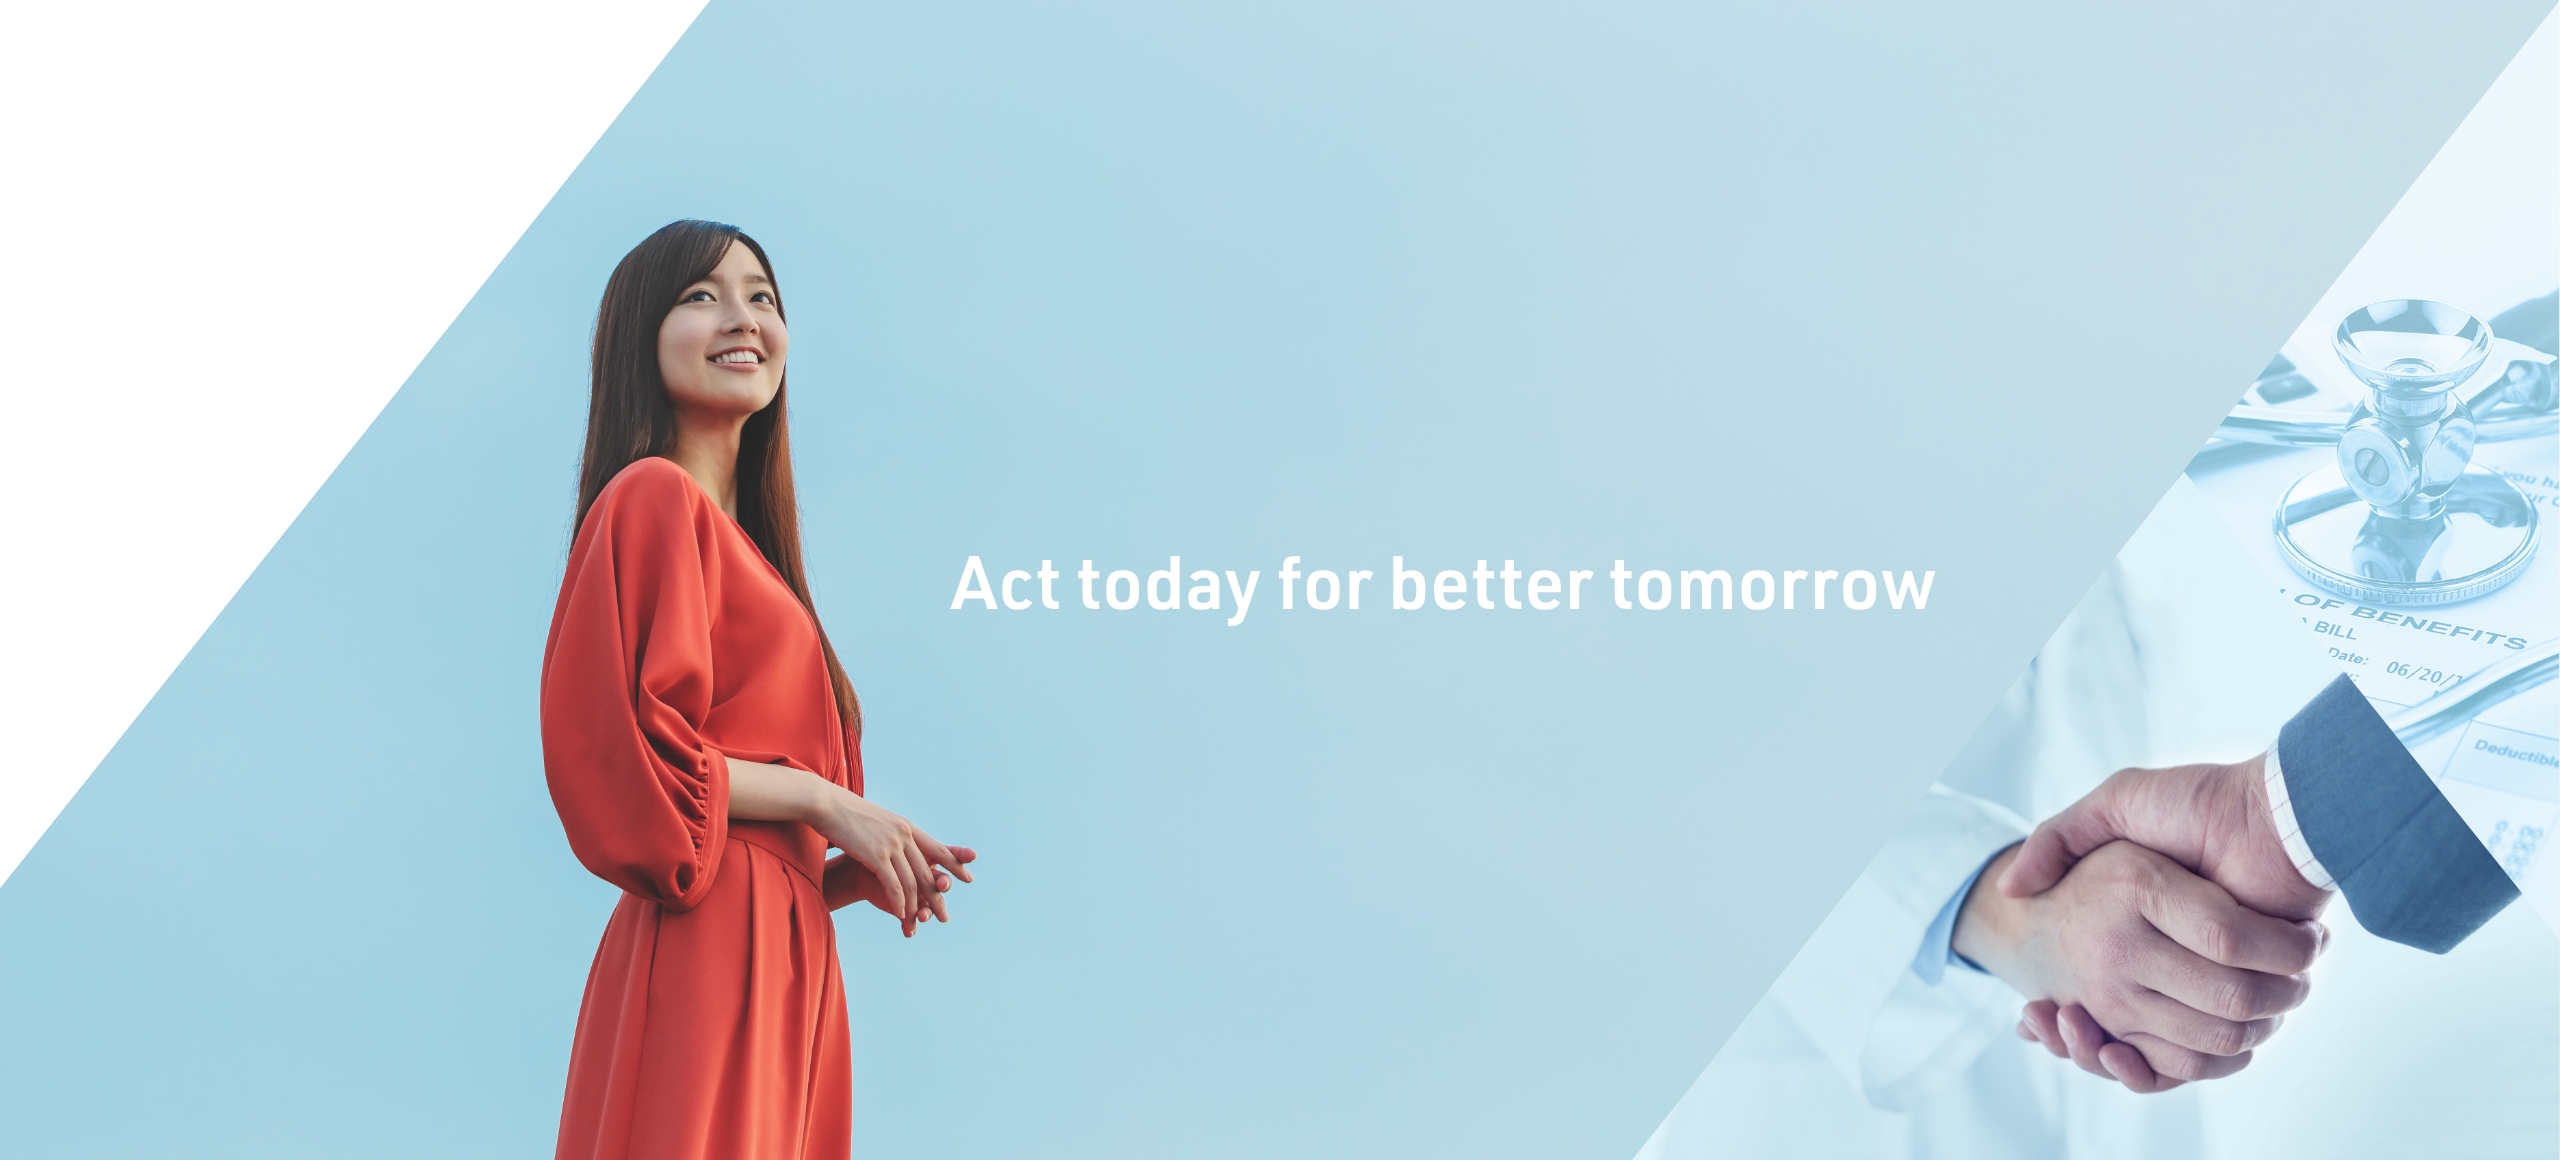 Act today for better tomorrow